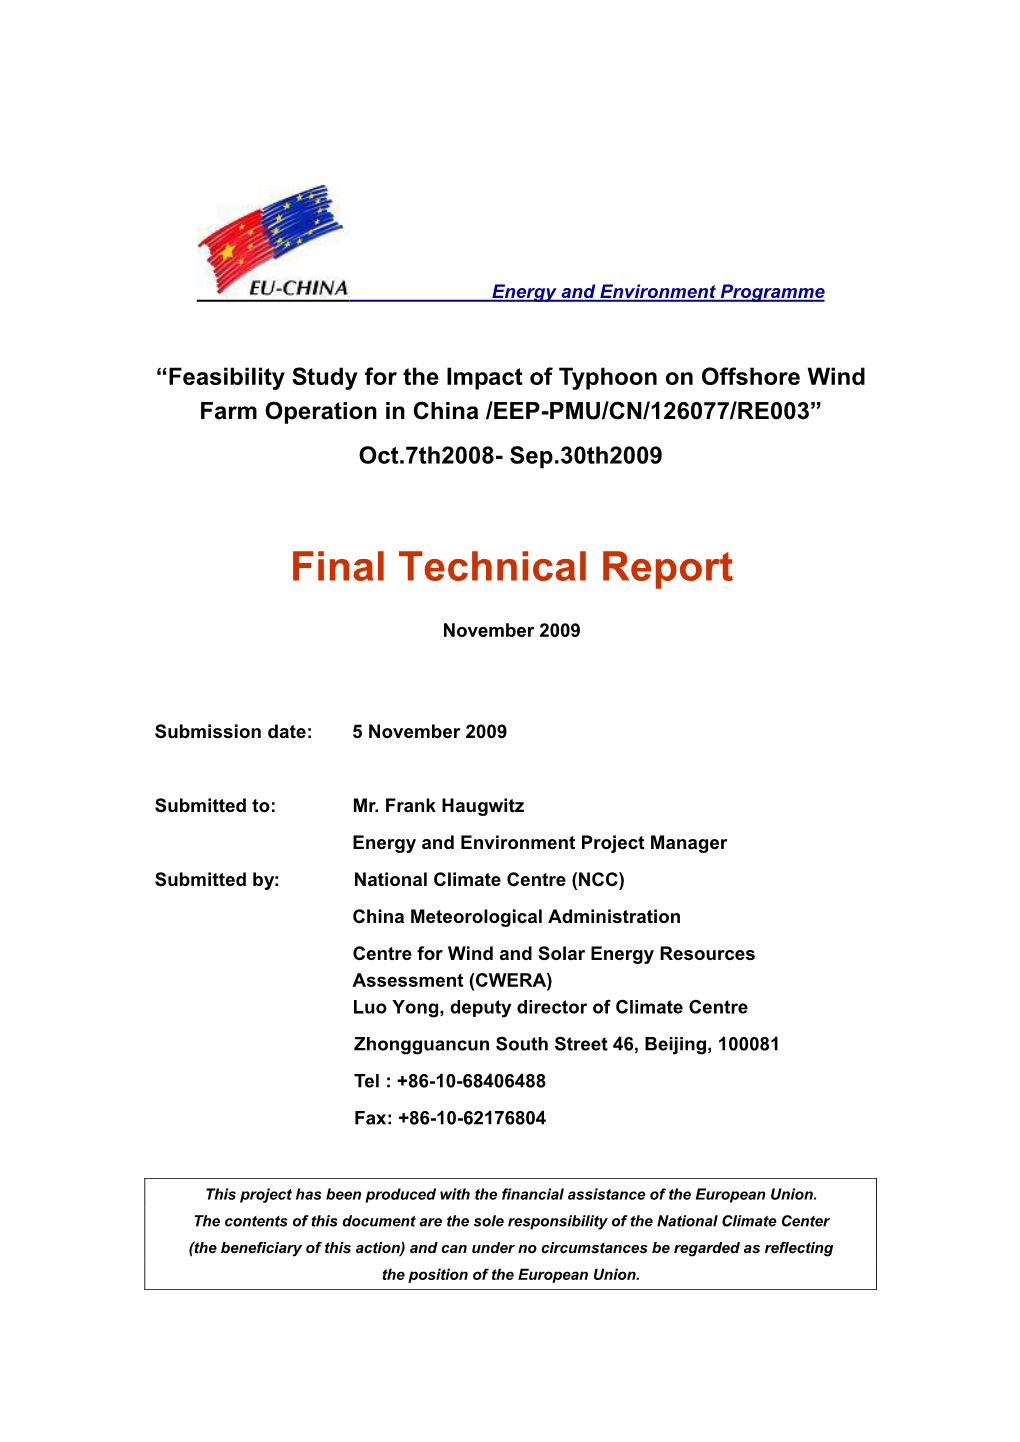 Feasibility Study for the Impact of Typhoon on Offshore Wind Farm Operation in China /EEP-PMU/CN/126077/RE003” Oct.7Th2008- Sep.30Th2009